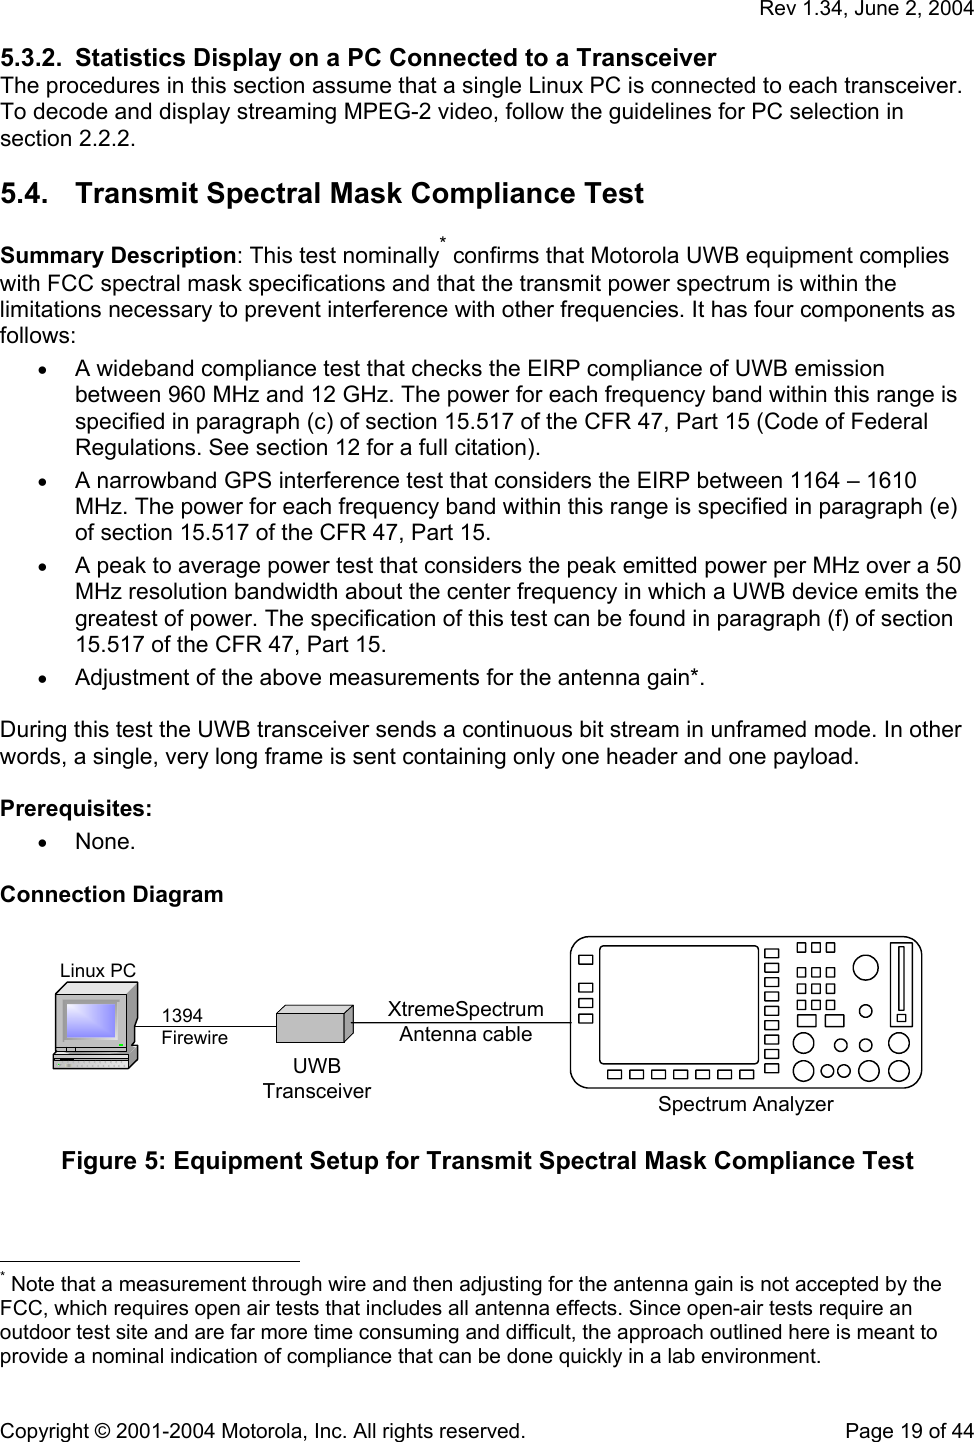   Rev 1.34, June 2, 2004  Copyright © 2001-2004 Motorola, Inc. All rights reserved.    Page 19 of 44 5.3.2.  Statistics Display on a PC Connected to a Transceiver The procedures in this section assume that a single Linux PC is connected to each transceiver. To decode and display streaming MPEG-2 video, follow the guidelines for PC selection in section 2.2.2. 5.4.  Transmit Spectral Mask Compliance Test  Summary Description: This test nominally* confirms that Motorola UWB equipment complies with FCC spectral mask specifications and that the transmit power spectrum is within the limitations necessary to prevent interference with other frequencies. It has four components as follows: • A wideband compliance test that checks the EIRP compliance of UWB emission between 960 MHz and 12 GHz. The power for each frequency band within this range is specified in paragraph (c) of section 15.517 of the CFR 47, Part 15 (Code of Federal Regulations. See section 12 for a full citation). • A narrowband GPS interference test that considers the EIRP between 1164 – 1610 MHz. The power for each frequency band within this range is specified in paragraph (e) of section 15.517 of the CFR 47, Part 15. • A peak to average power test that considers the peak emitted power per MHz over a 50 MHz resolution bandwidth about the center frequency in which a UWB device emits the greatest of power. The specification of this test can be found in paragraph (f) of section 15.517 of the CFR 47, Part 15. • Adjustment of the above measurements for the antenna gain*.  During this test the UWB transceiver sends a continuous bit stream in unframed mode. In other words, a single, very long frame is sent containing only one header and one payload.  Prerequisites: • None.  Connection Diagram  Linux PC1394FirewireUWBTransceiver Spectrum AnalyzerXtremeSpectrumAntenna cable  Figure 5: Equipment Setup for Transmit Spectral Mask Compliance Test                                                   * Note that a measurement through wire and then adjusting for the antenna gain is not accepted by the FCC, which requires open air tests that includes all antenna effects. Since open-air tests require an outdoor test site and are far more time consuming and difficult, the approach outlined here is meant to provide a nominal indication of compliance that can be done quickly in a lab environment. 